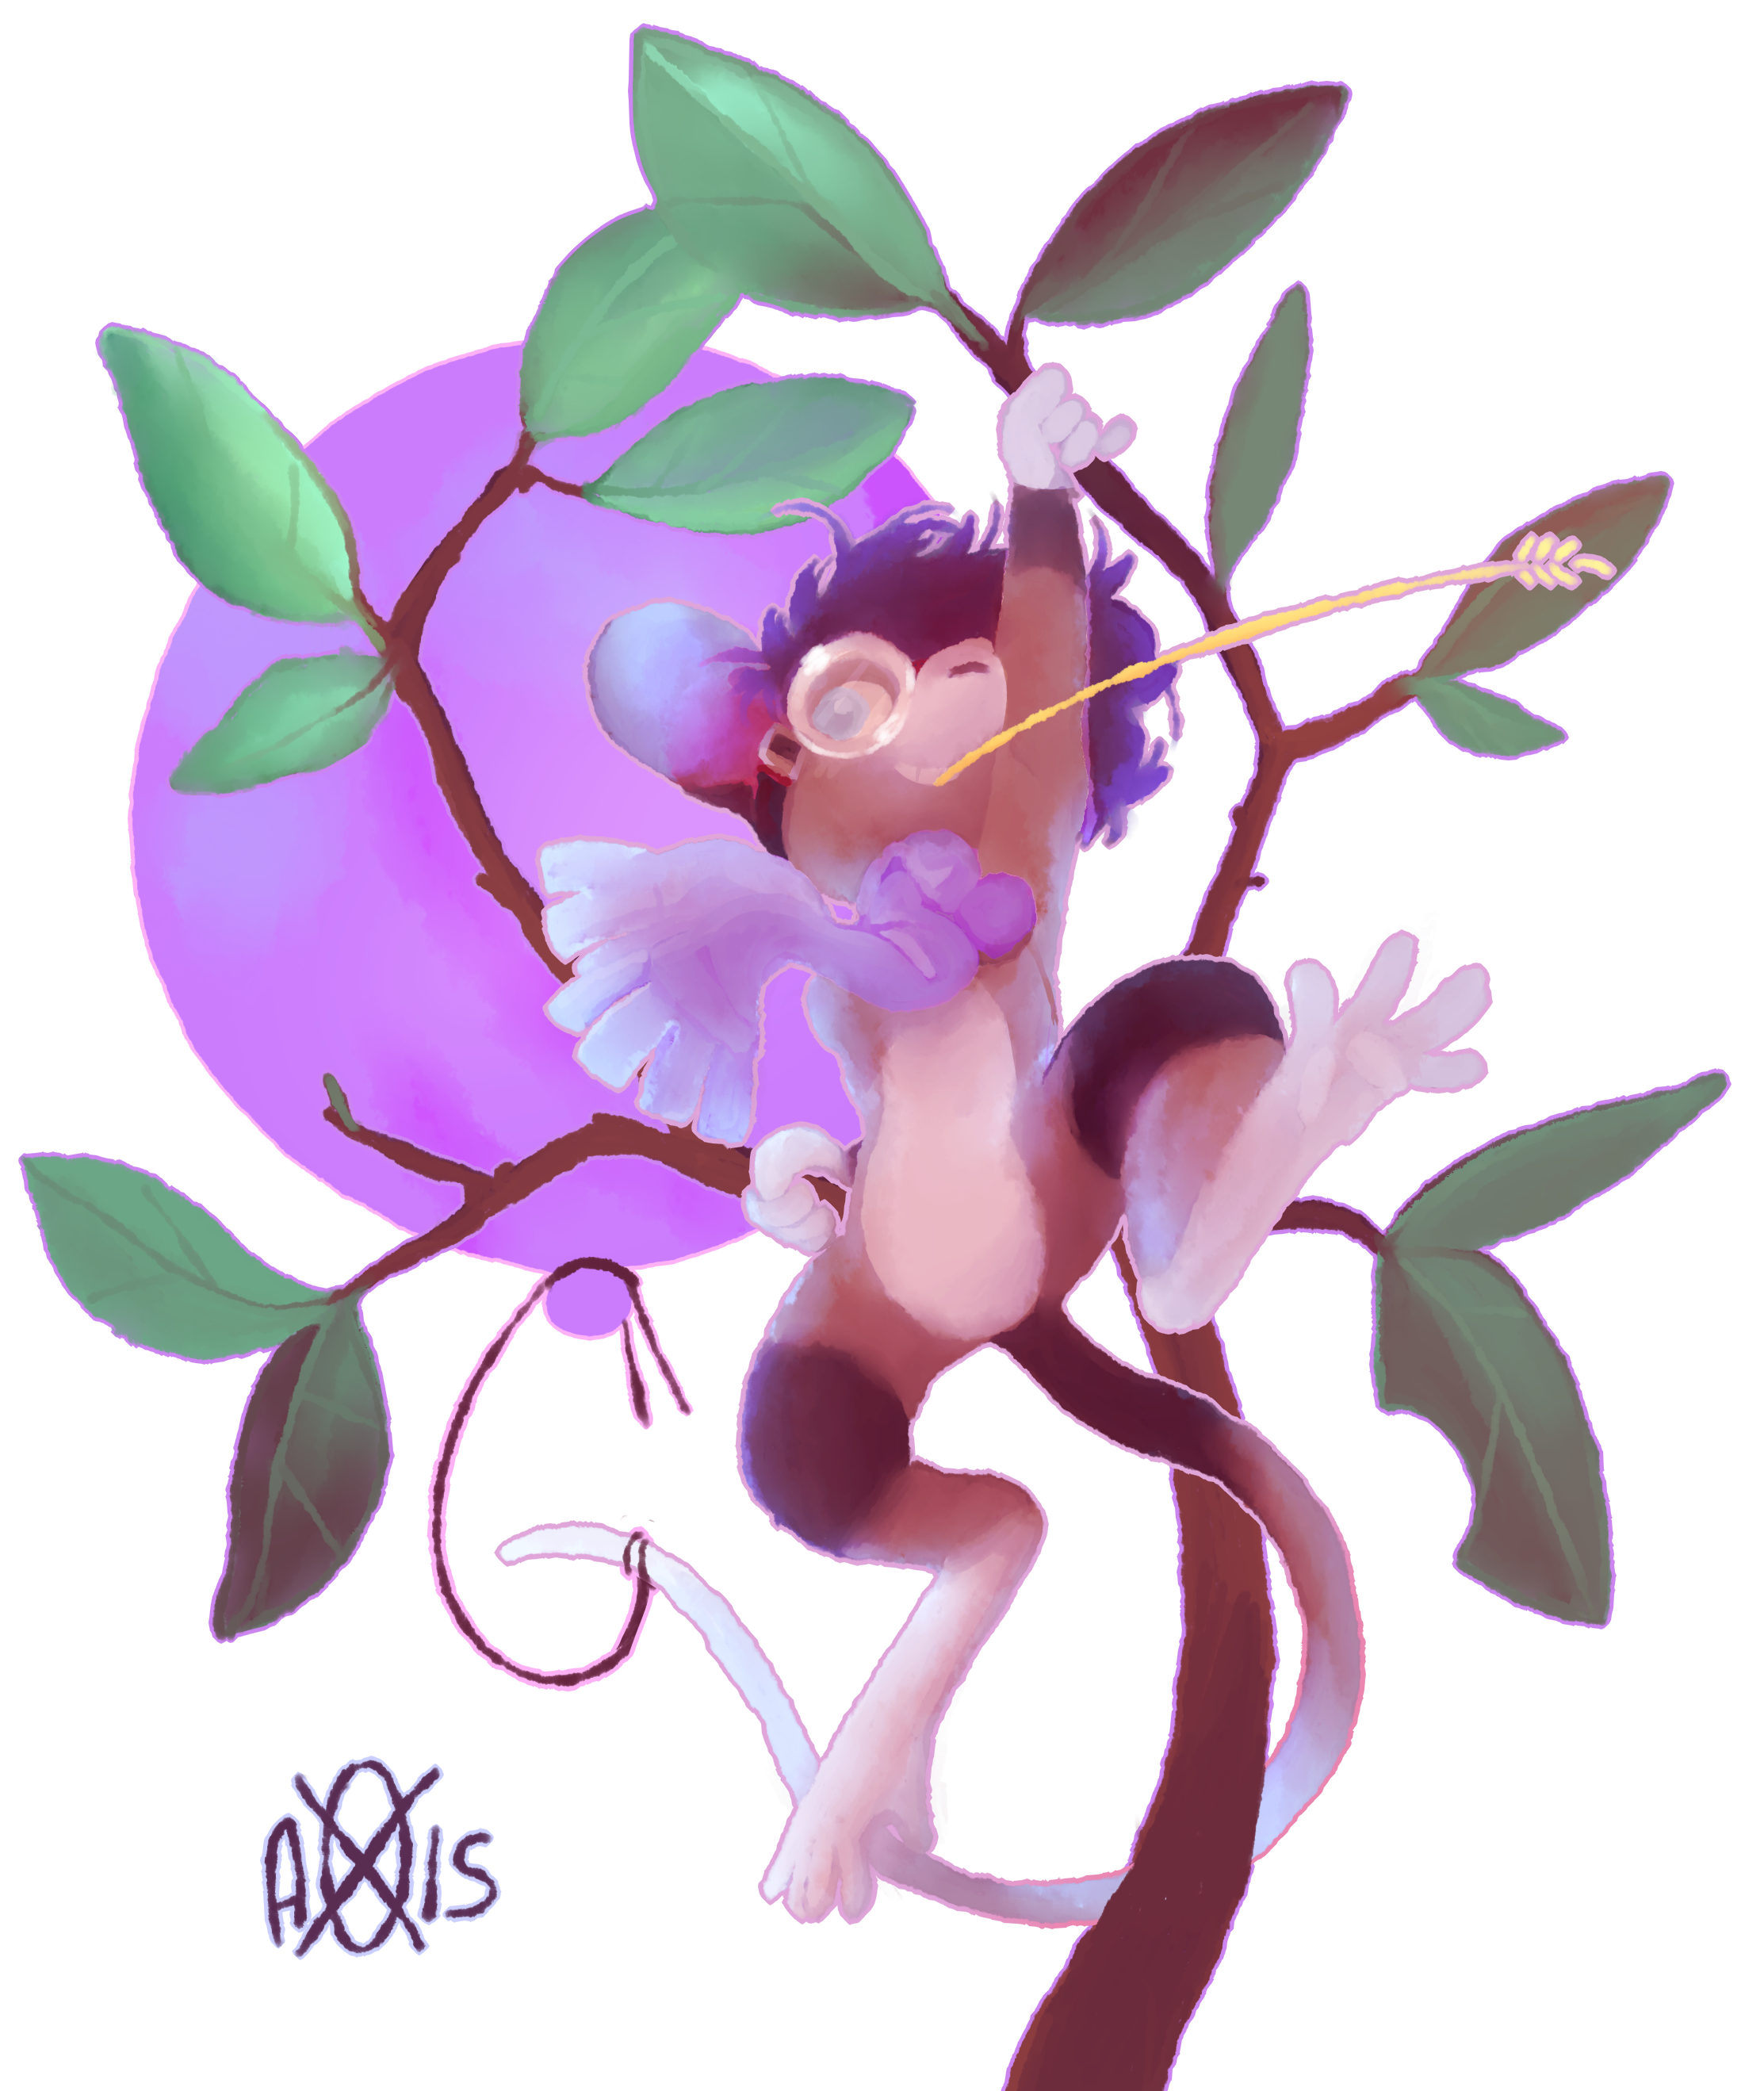 http://orig14.deviantart.net/88c4/f/2017/040/5/5/me_in_a_tree_by_sircaptainmouse-dayf1fh.png